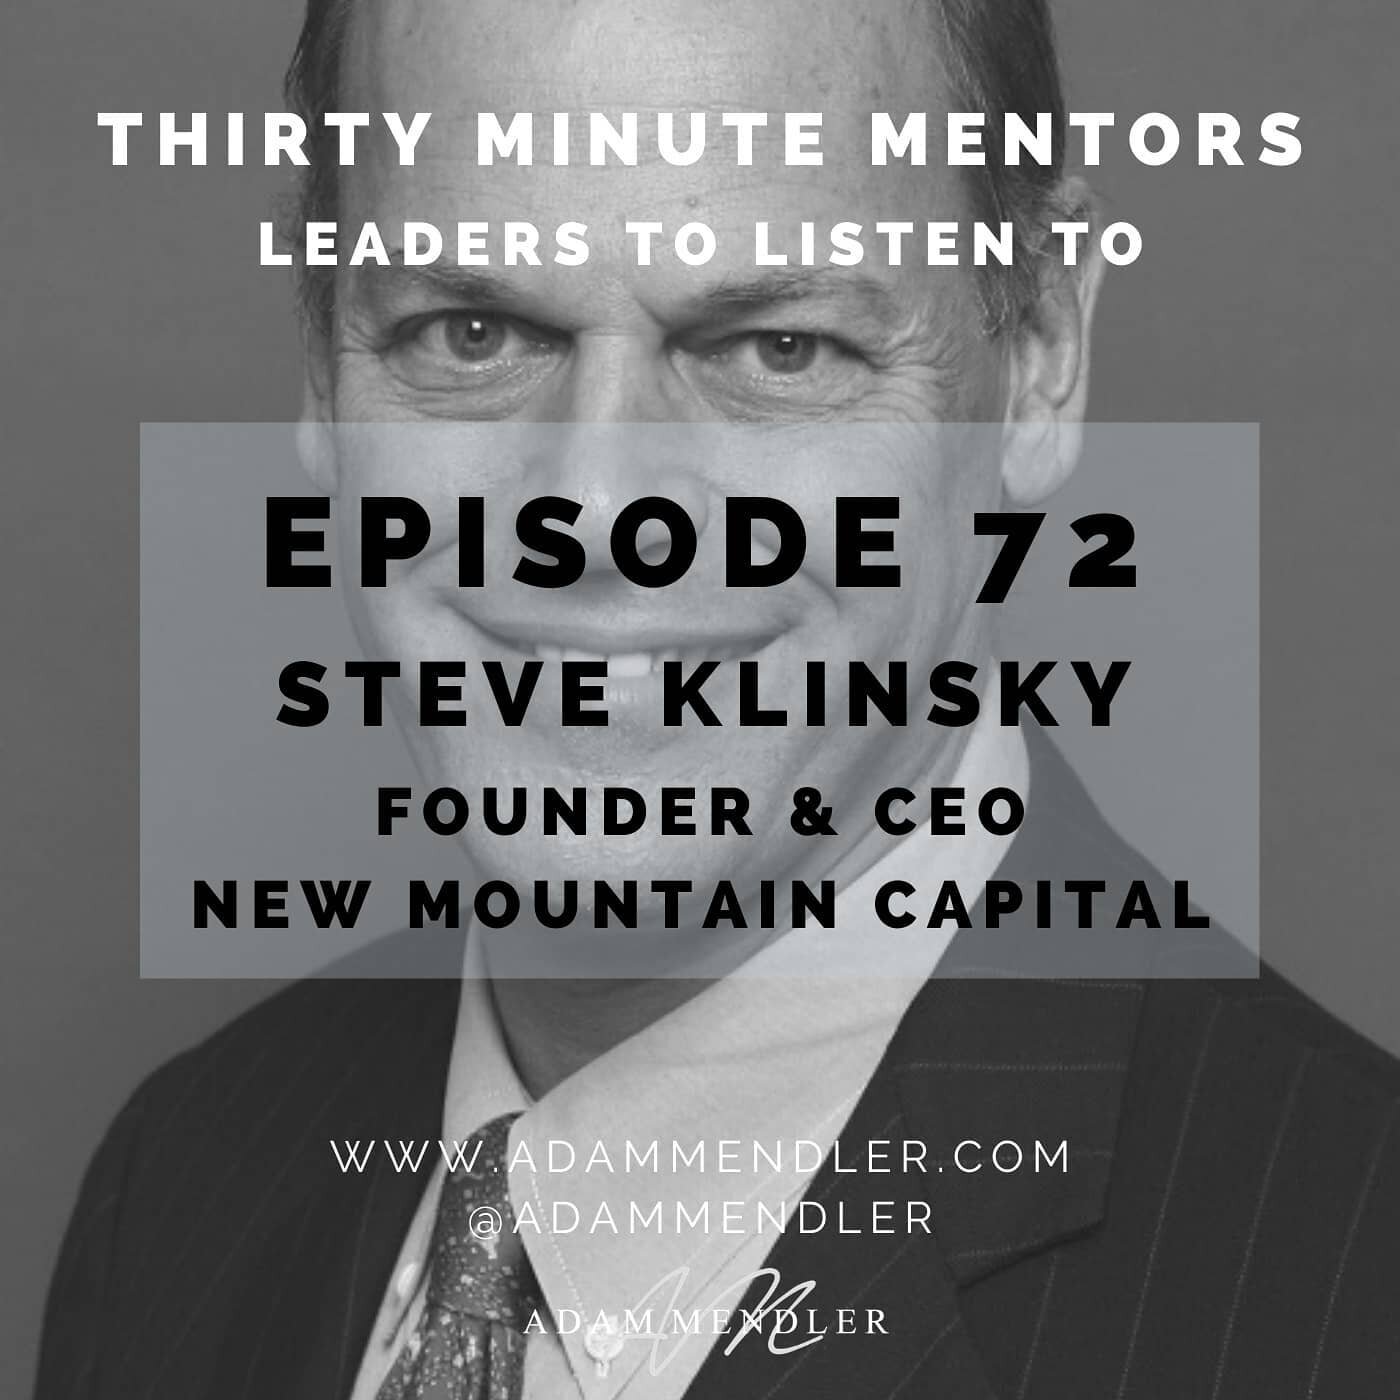 A pioneer in the world of private equity and member of the Forbes 400, Steve Klinskly joined me on Episode 72 of Thirty Minute Mentors. We discussed a wide range of topics, including the evolution of the private equity industry and how to succeed in 